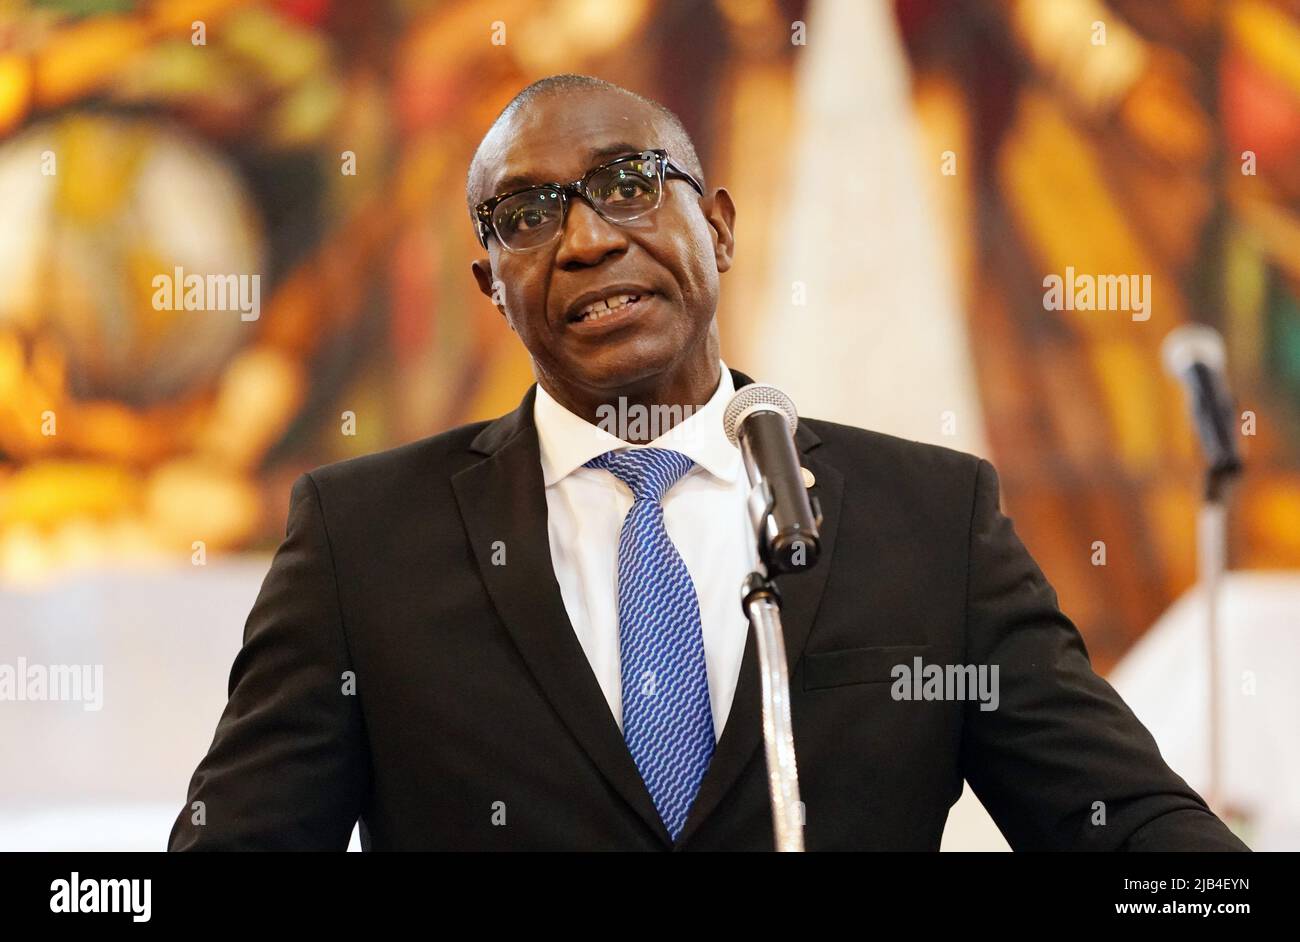 St. Louis, United States. 02nd June, 2022. St. Louis Board of Alderman President Lewis Reed, shown in this December 31, 2020 file photo, has been indicted along with two aldermen, by a federal grand jury on corruption charges in St. Louis on Thursday, June 2, 2022. The indictment alleges all three used their official position as Board of Aldermen members to accept payments to assist John Doe, a small business owner. Photo by Bill Greenblatt/UPI Credit: UPI/Alamy Live News Stock Photo